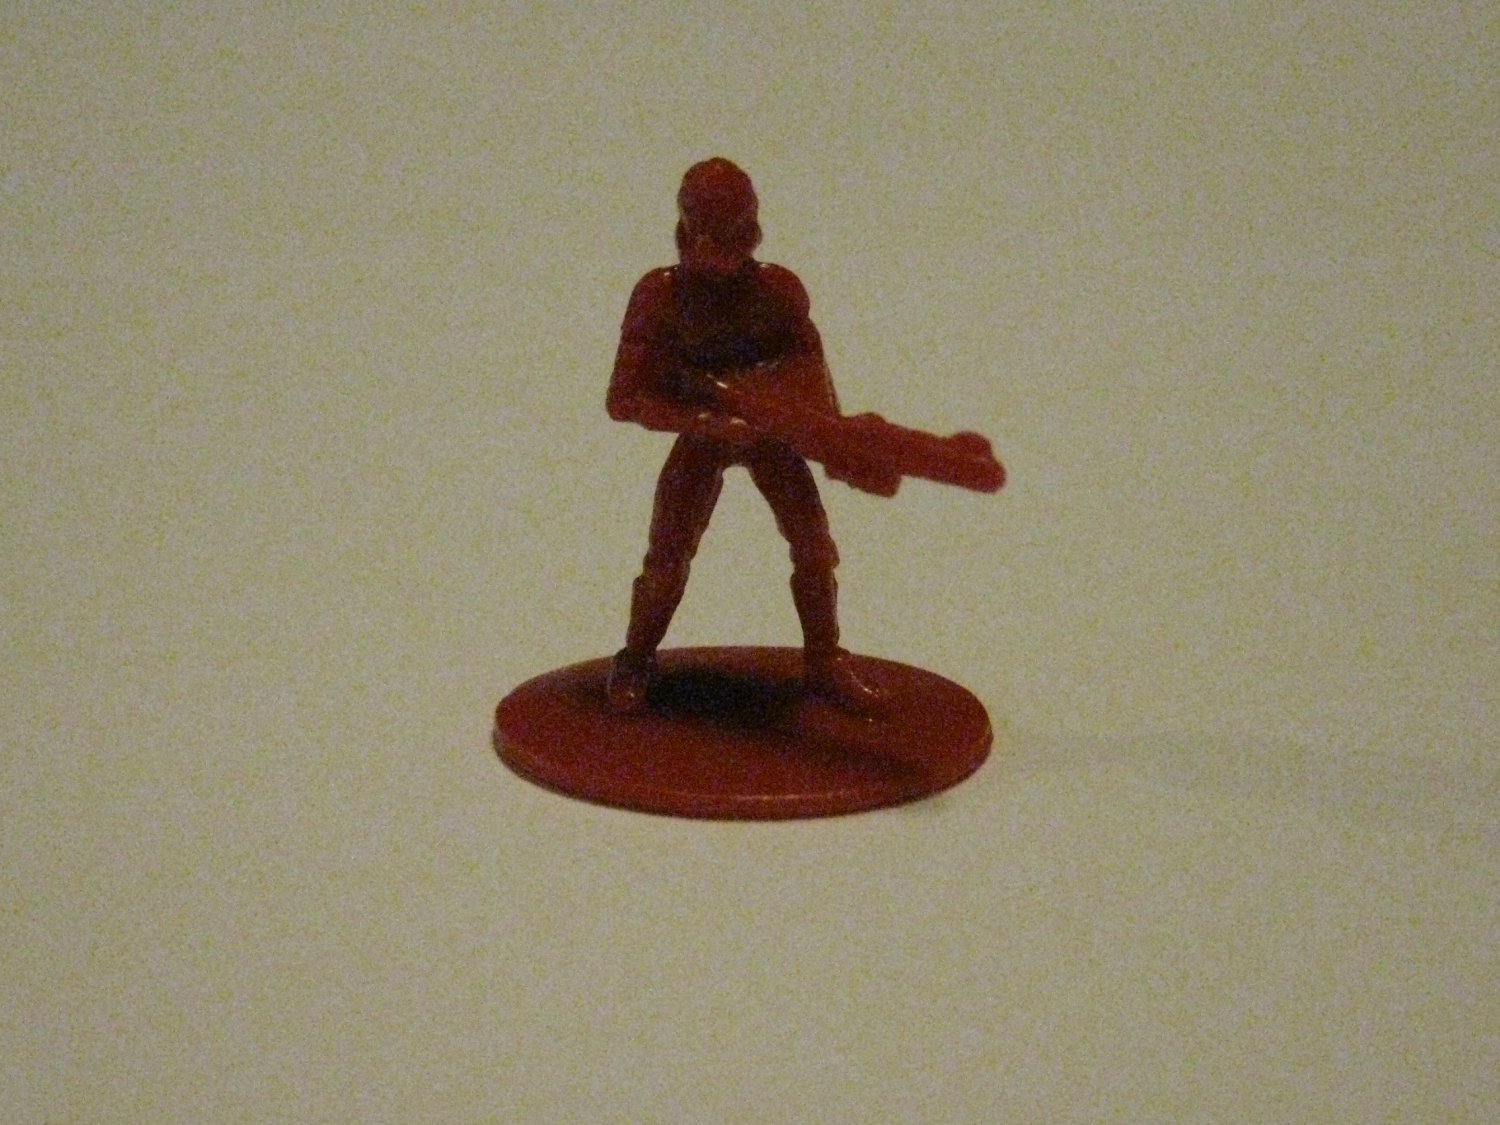 Primary image for 2005 Risk: Star Wars The Clone Wars Board Game Piece: Red Clone Player Pawn